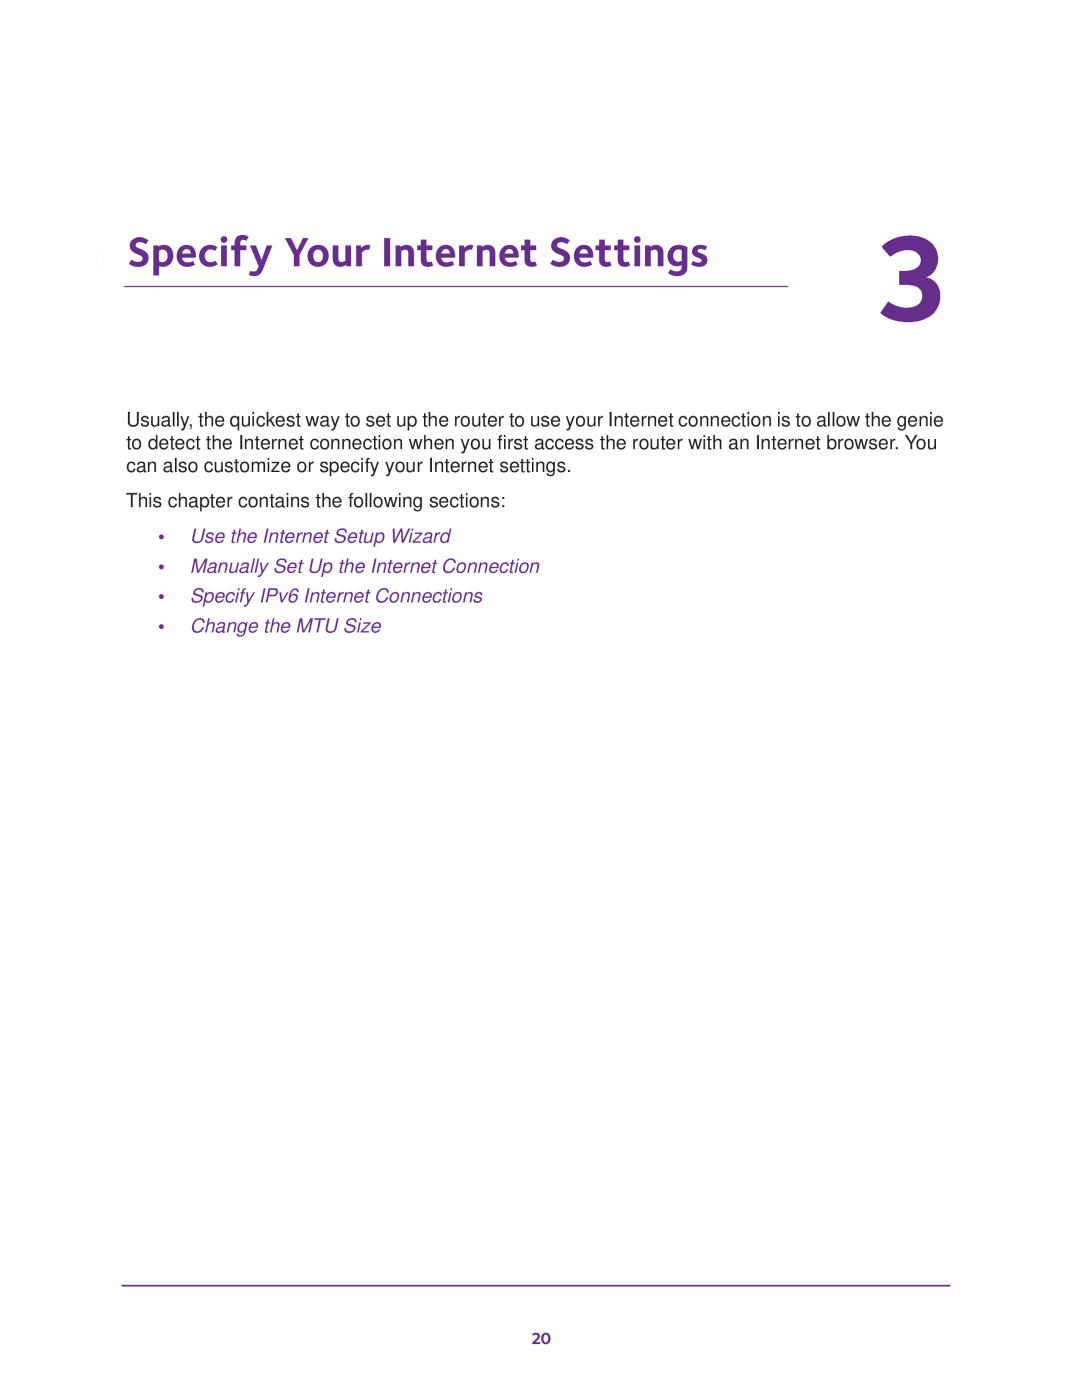 NETGEAR Model R7000 Specify Your Internet Settings, Use the Internet Setup Wizard Manually Set Up the Internet Connection 